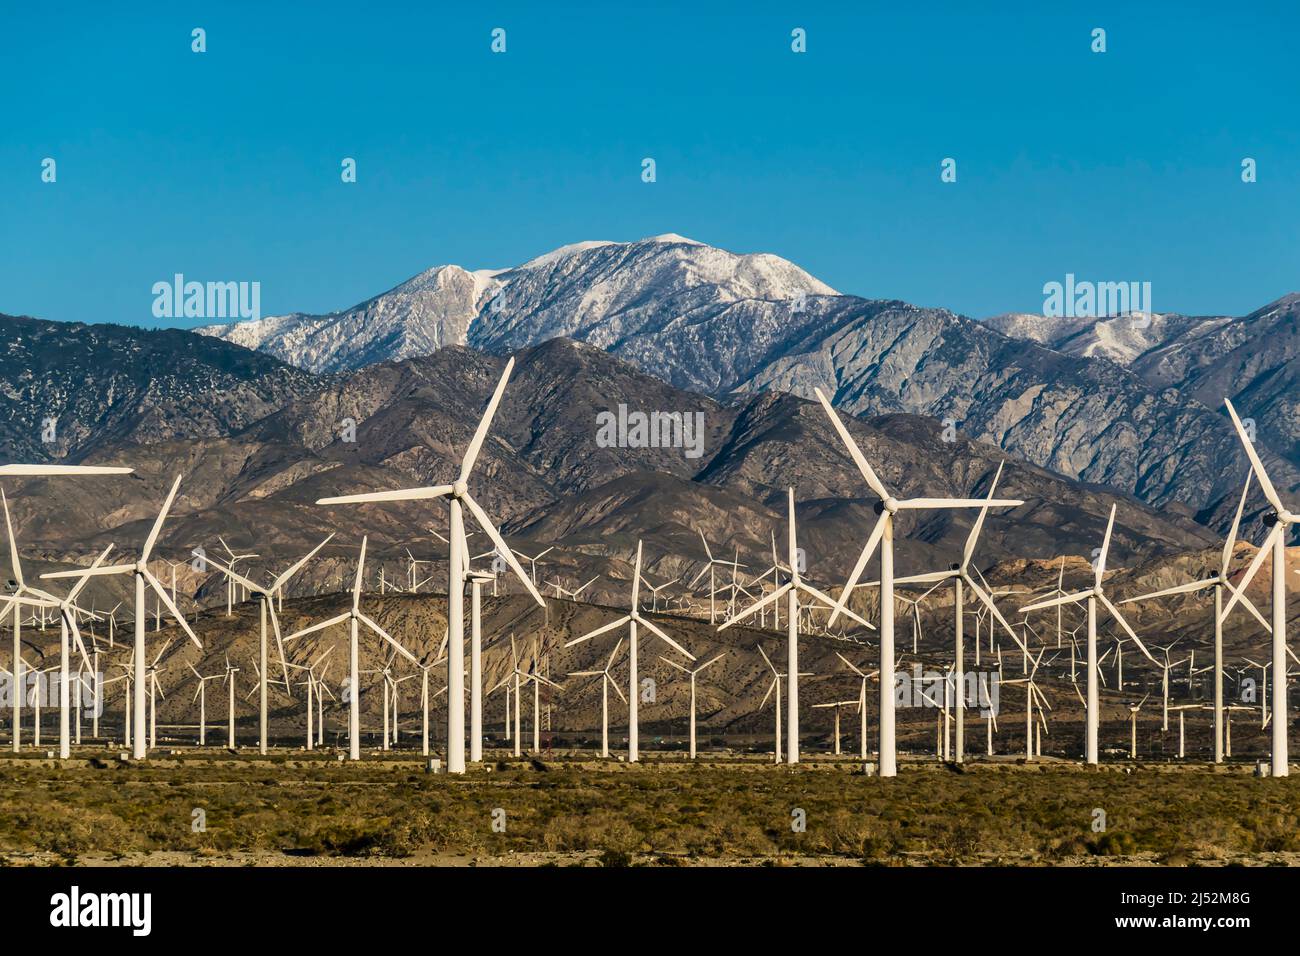 A large wind farm in Palm Springs, California Stock Photo